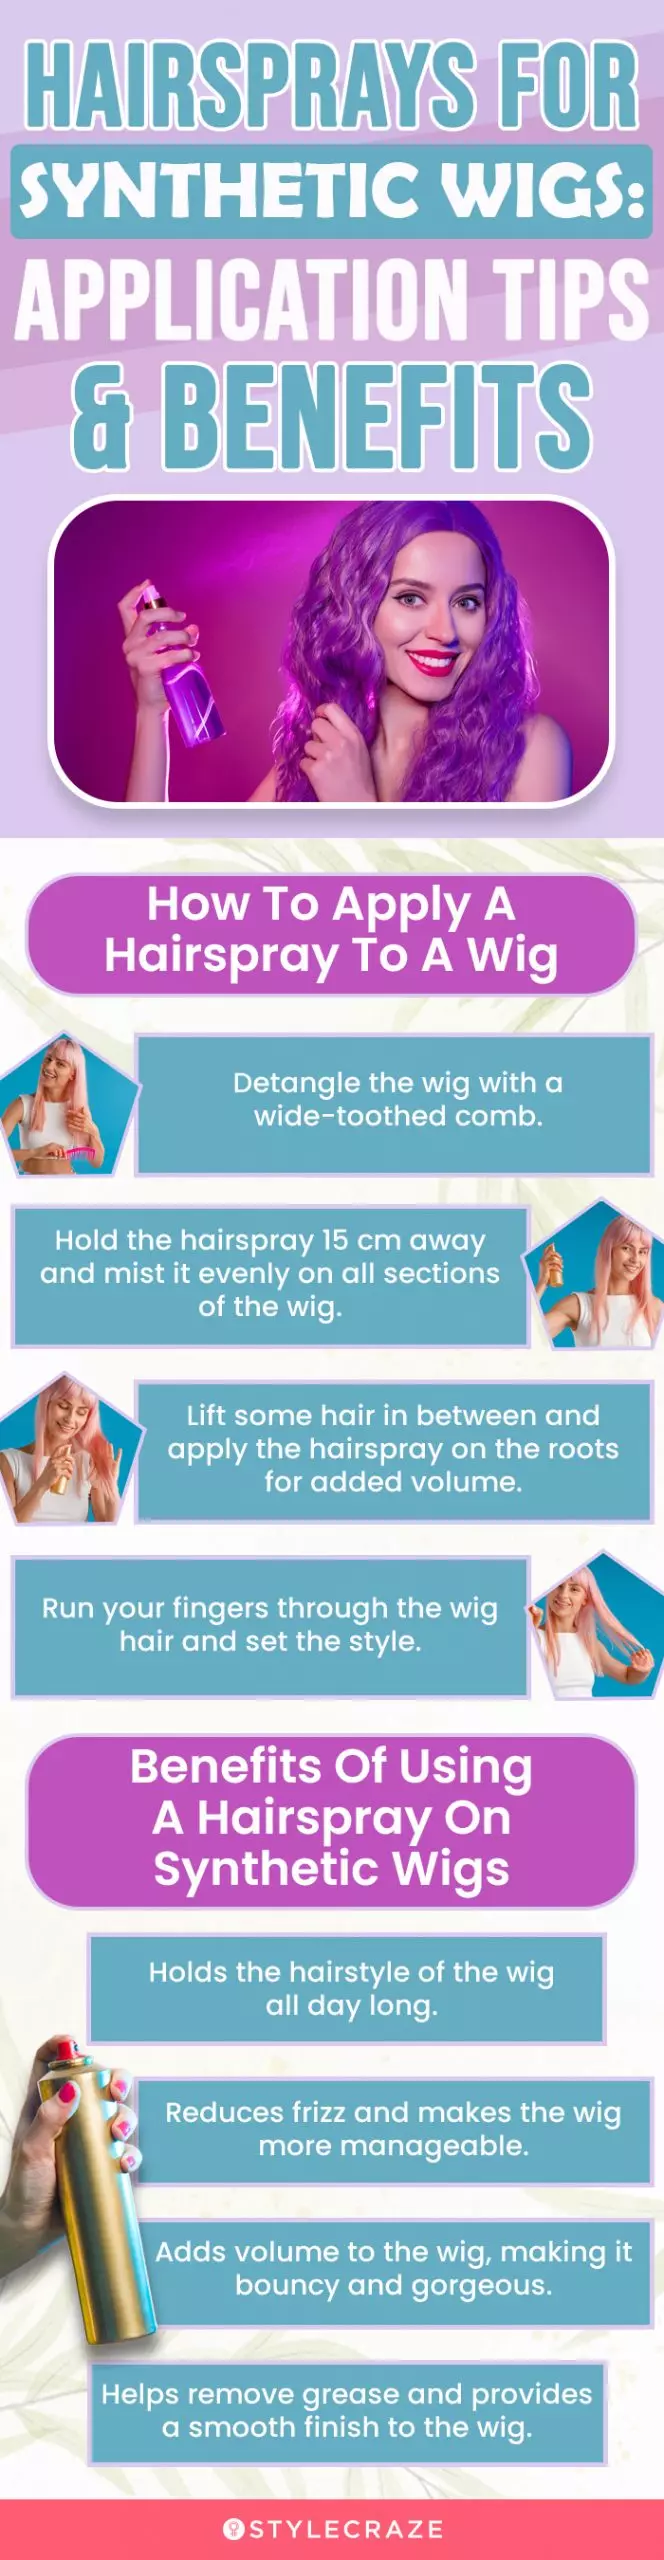 Hairsprays For Synthetic Wigs: Application Tips & Benefits (infographic)